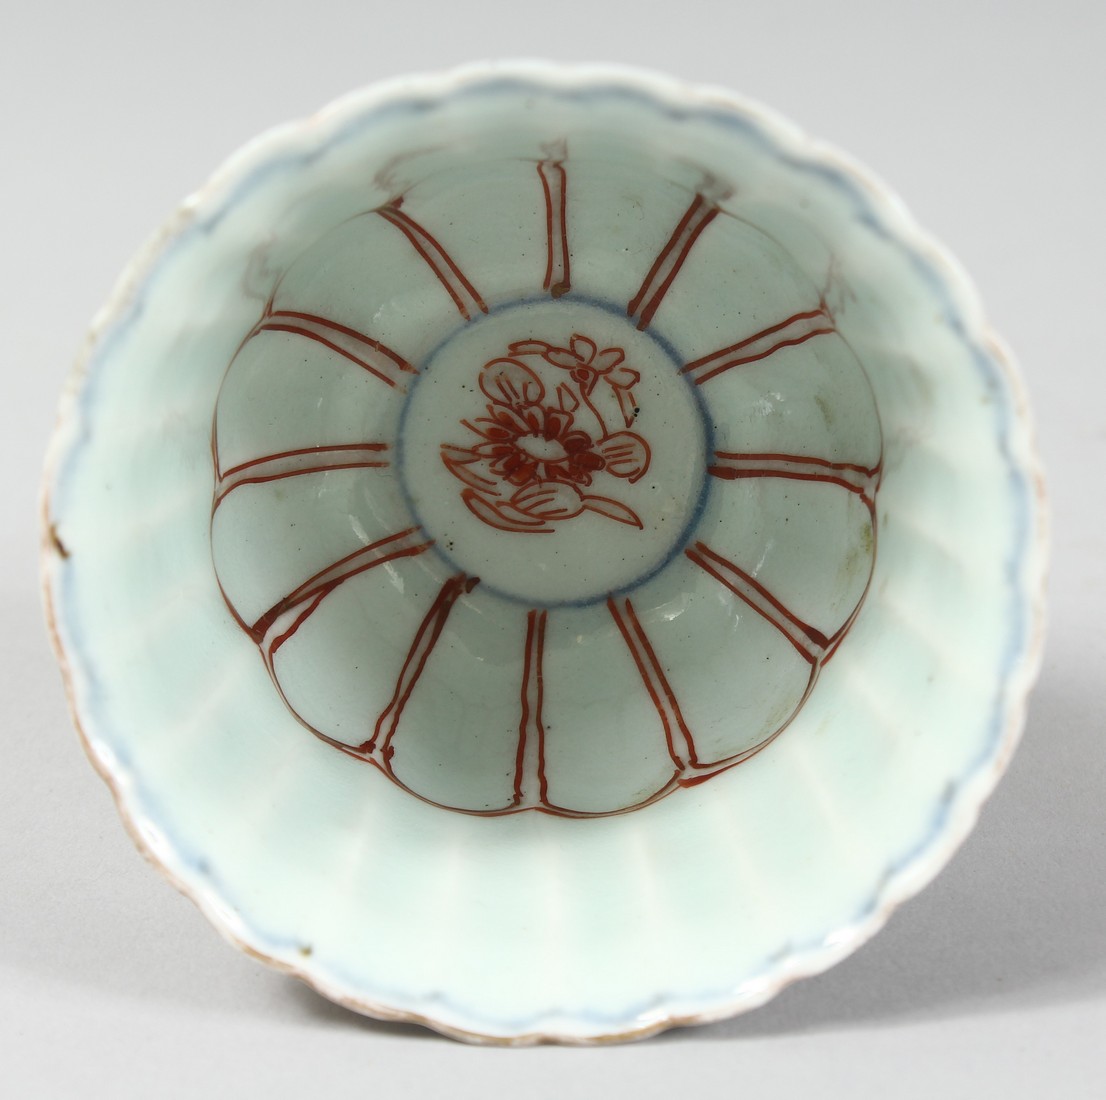 AN 18TH CENTURY JAPANESE IMARI PORCELAIN CUP, the interior of ribbed form, with floral motifs - Image 5 of 6